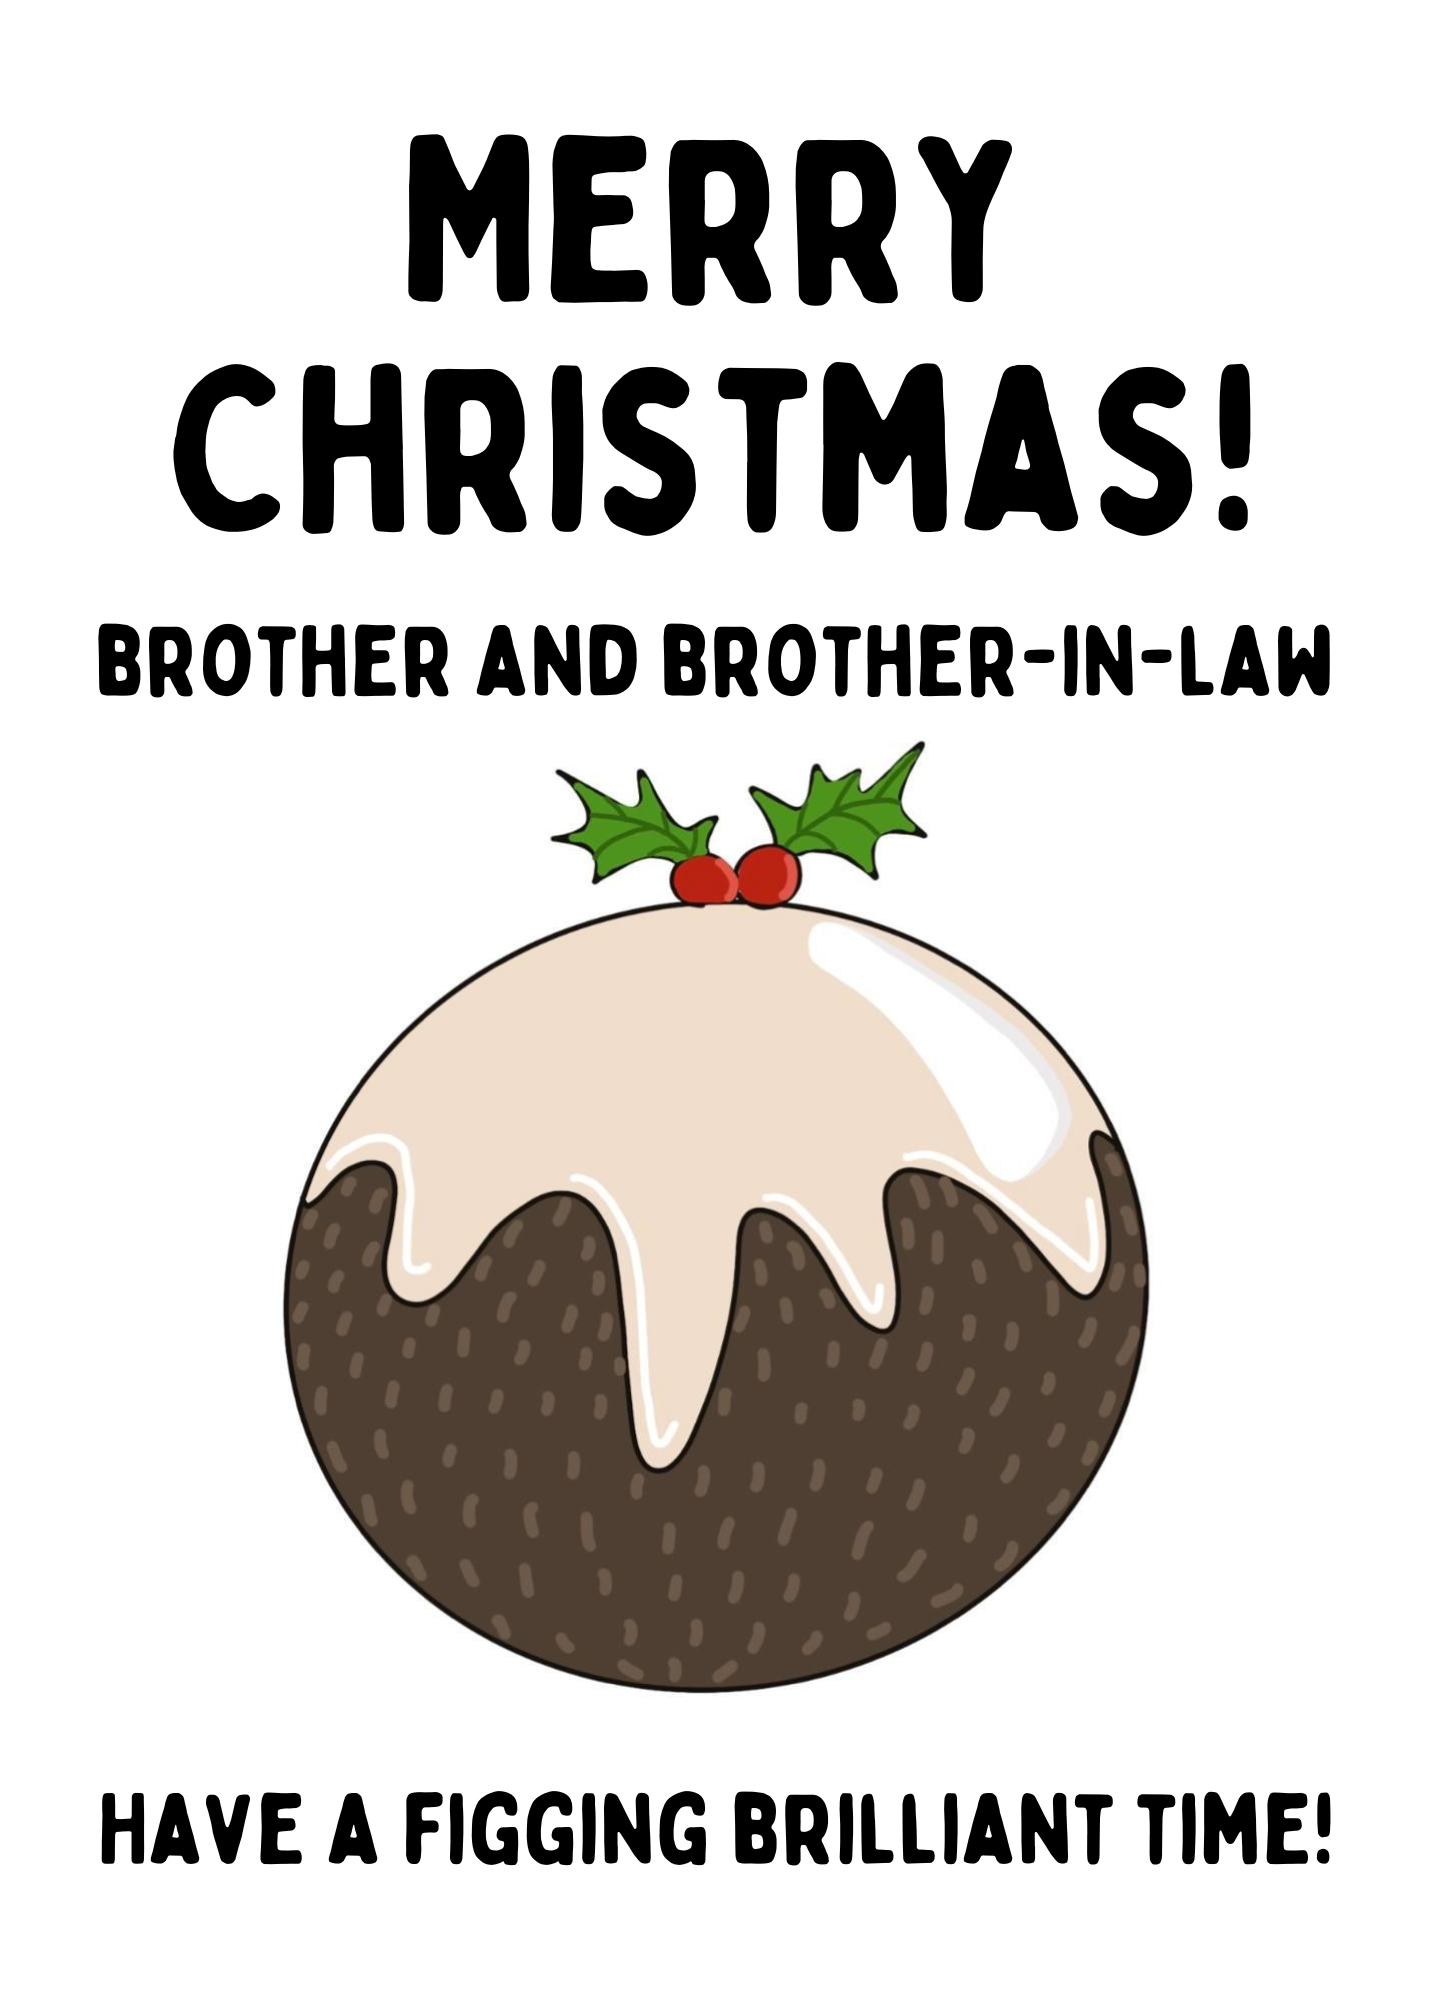 Brother and Brother in law Christmas Card